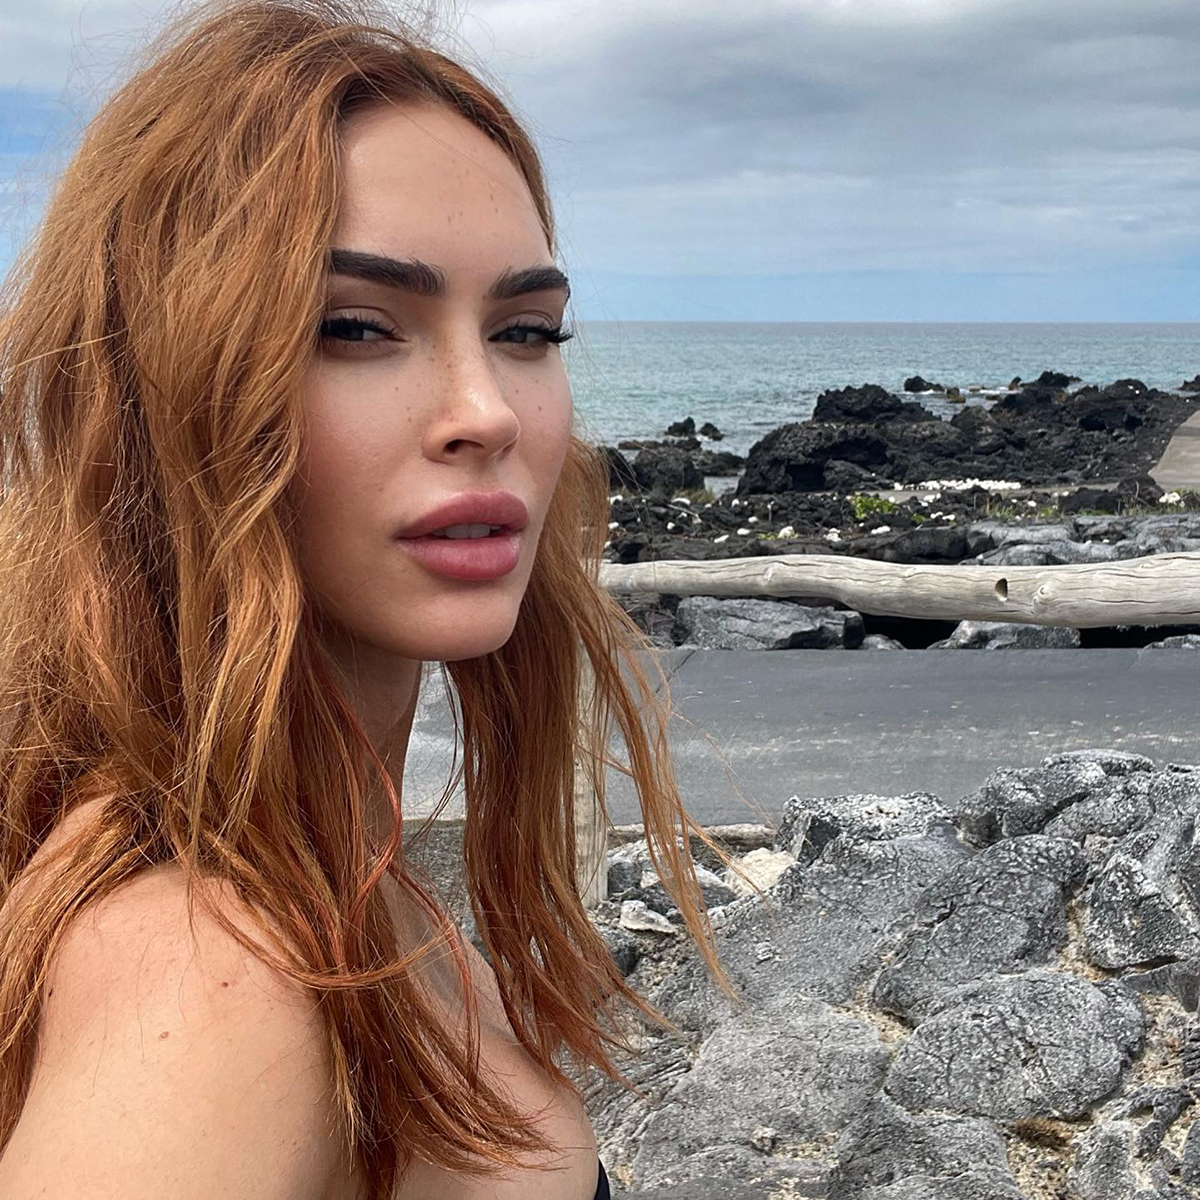 Megan Fox Shares Steamy Bikini Photo Weeks After Body Image Comments